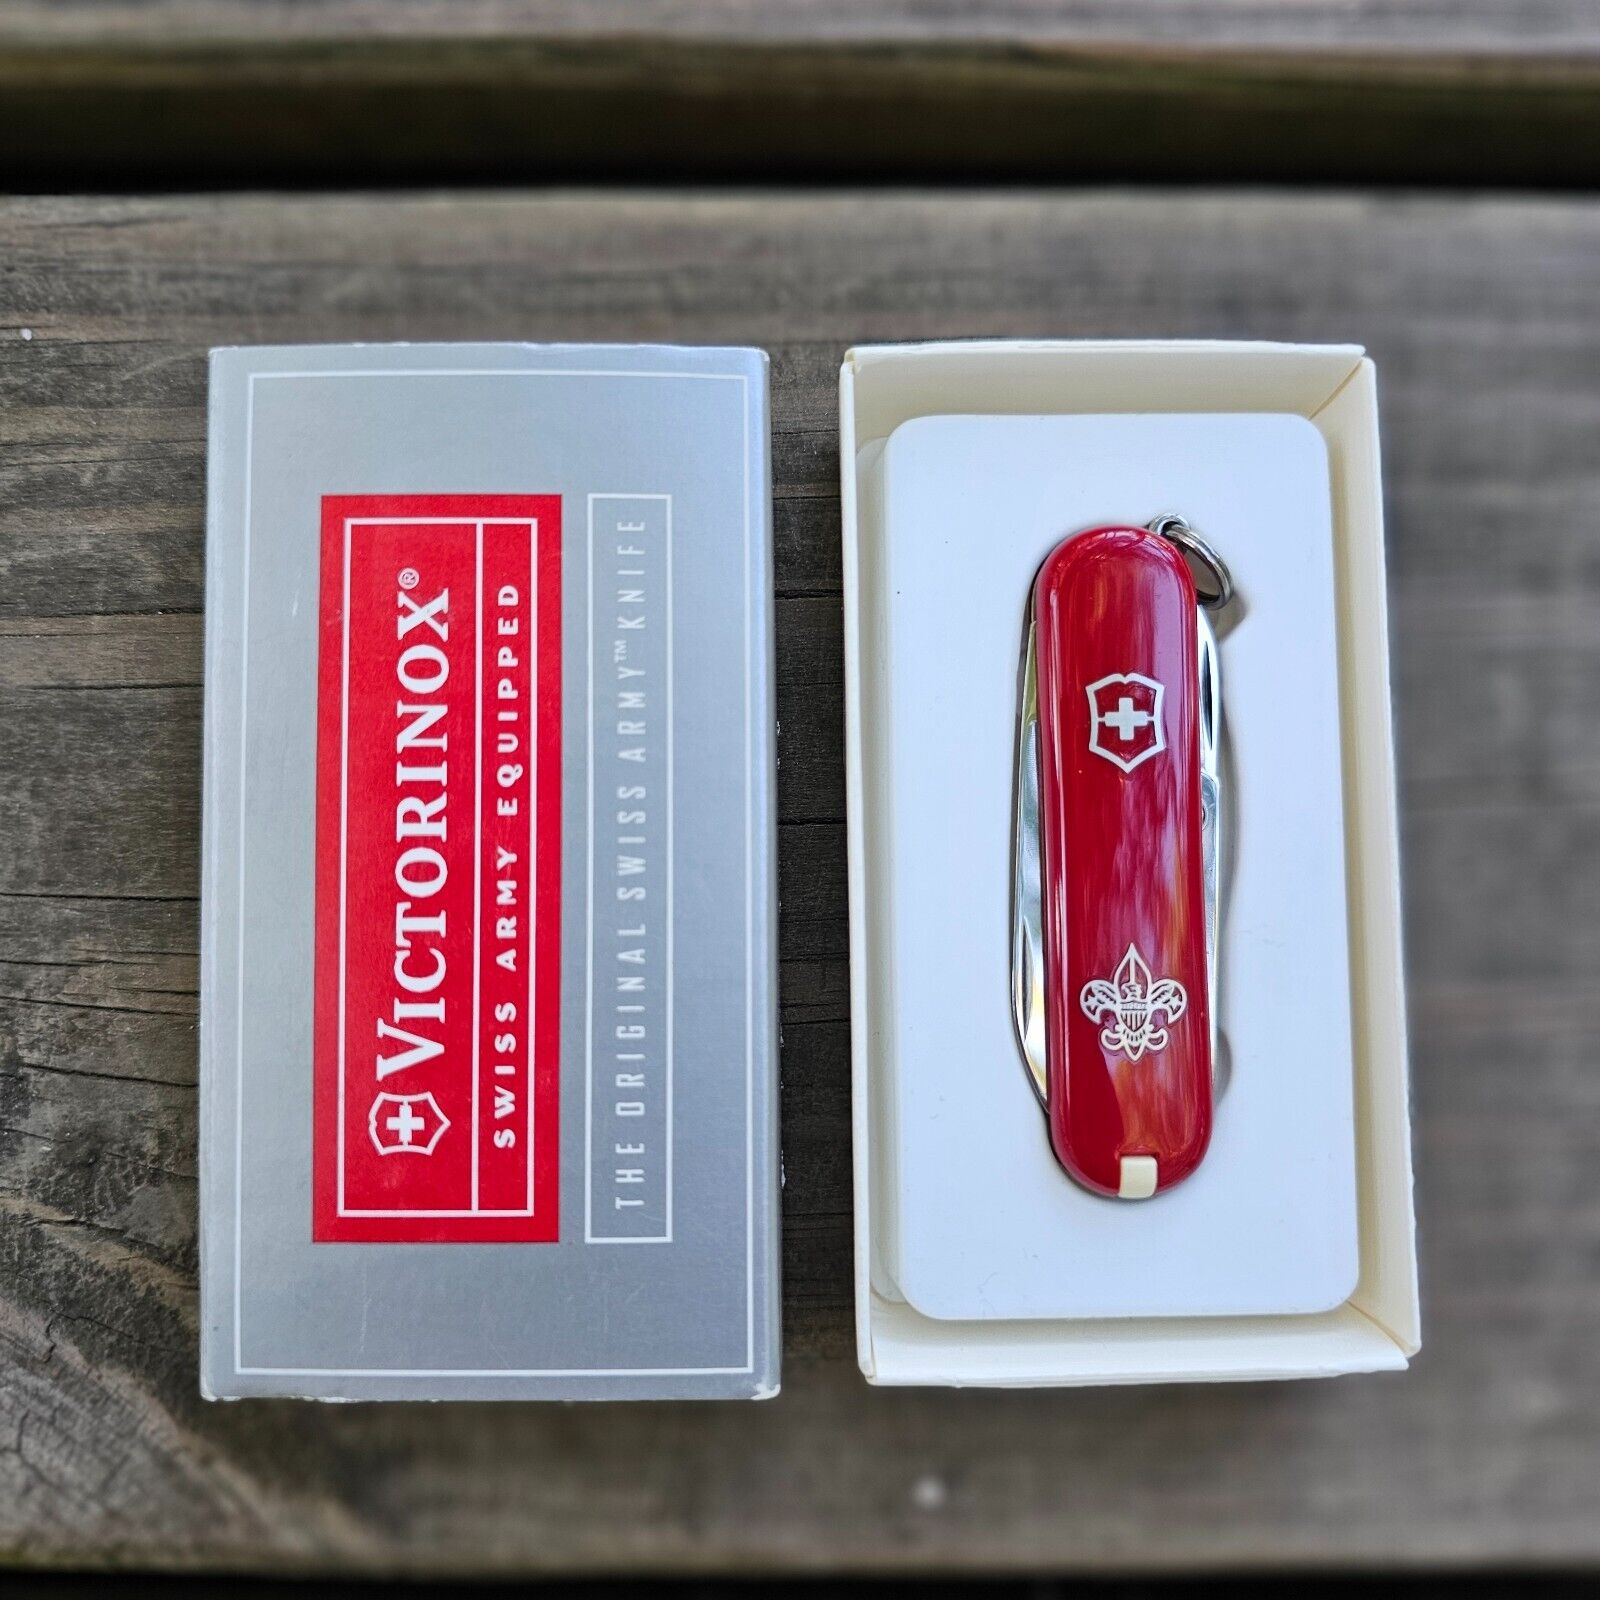 Victorinox Classic BSA (Boy Scouts of America) #1253 Swiss Army Knife - EXC